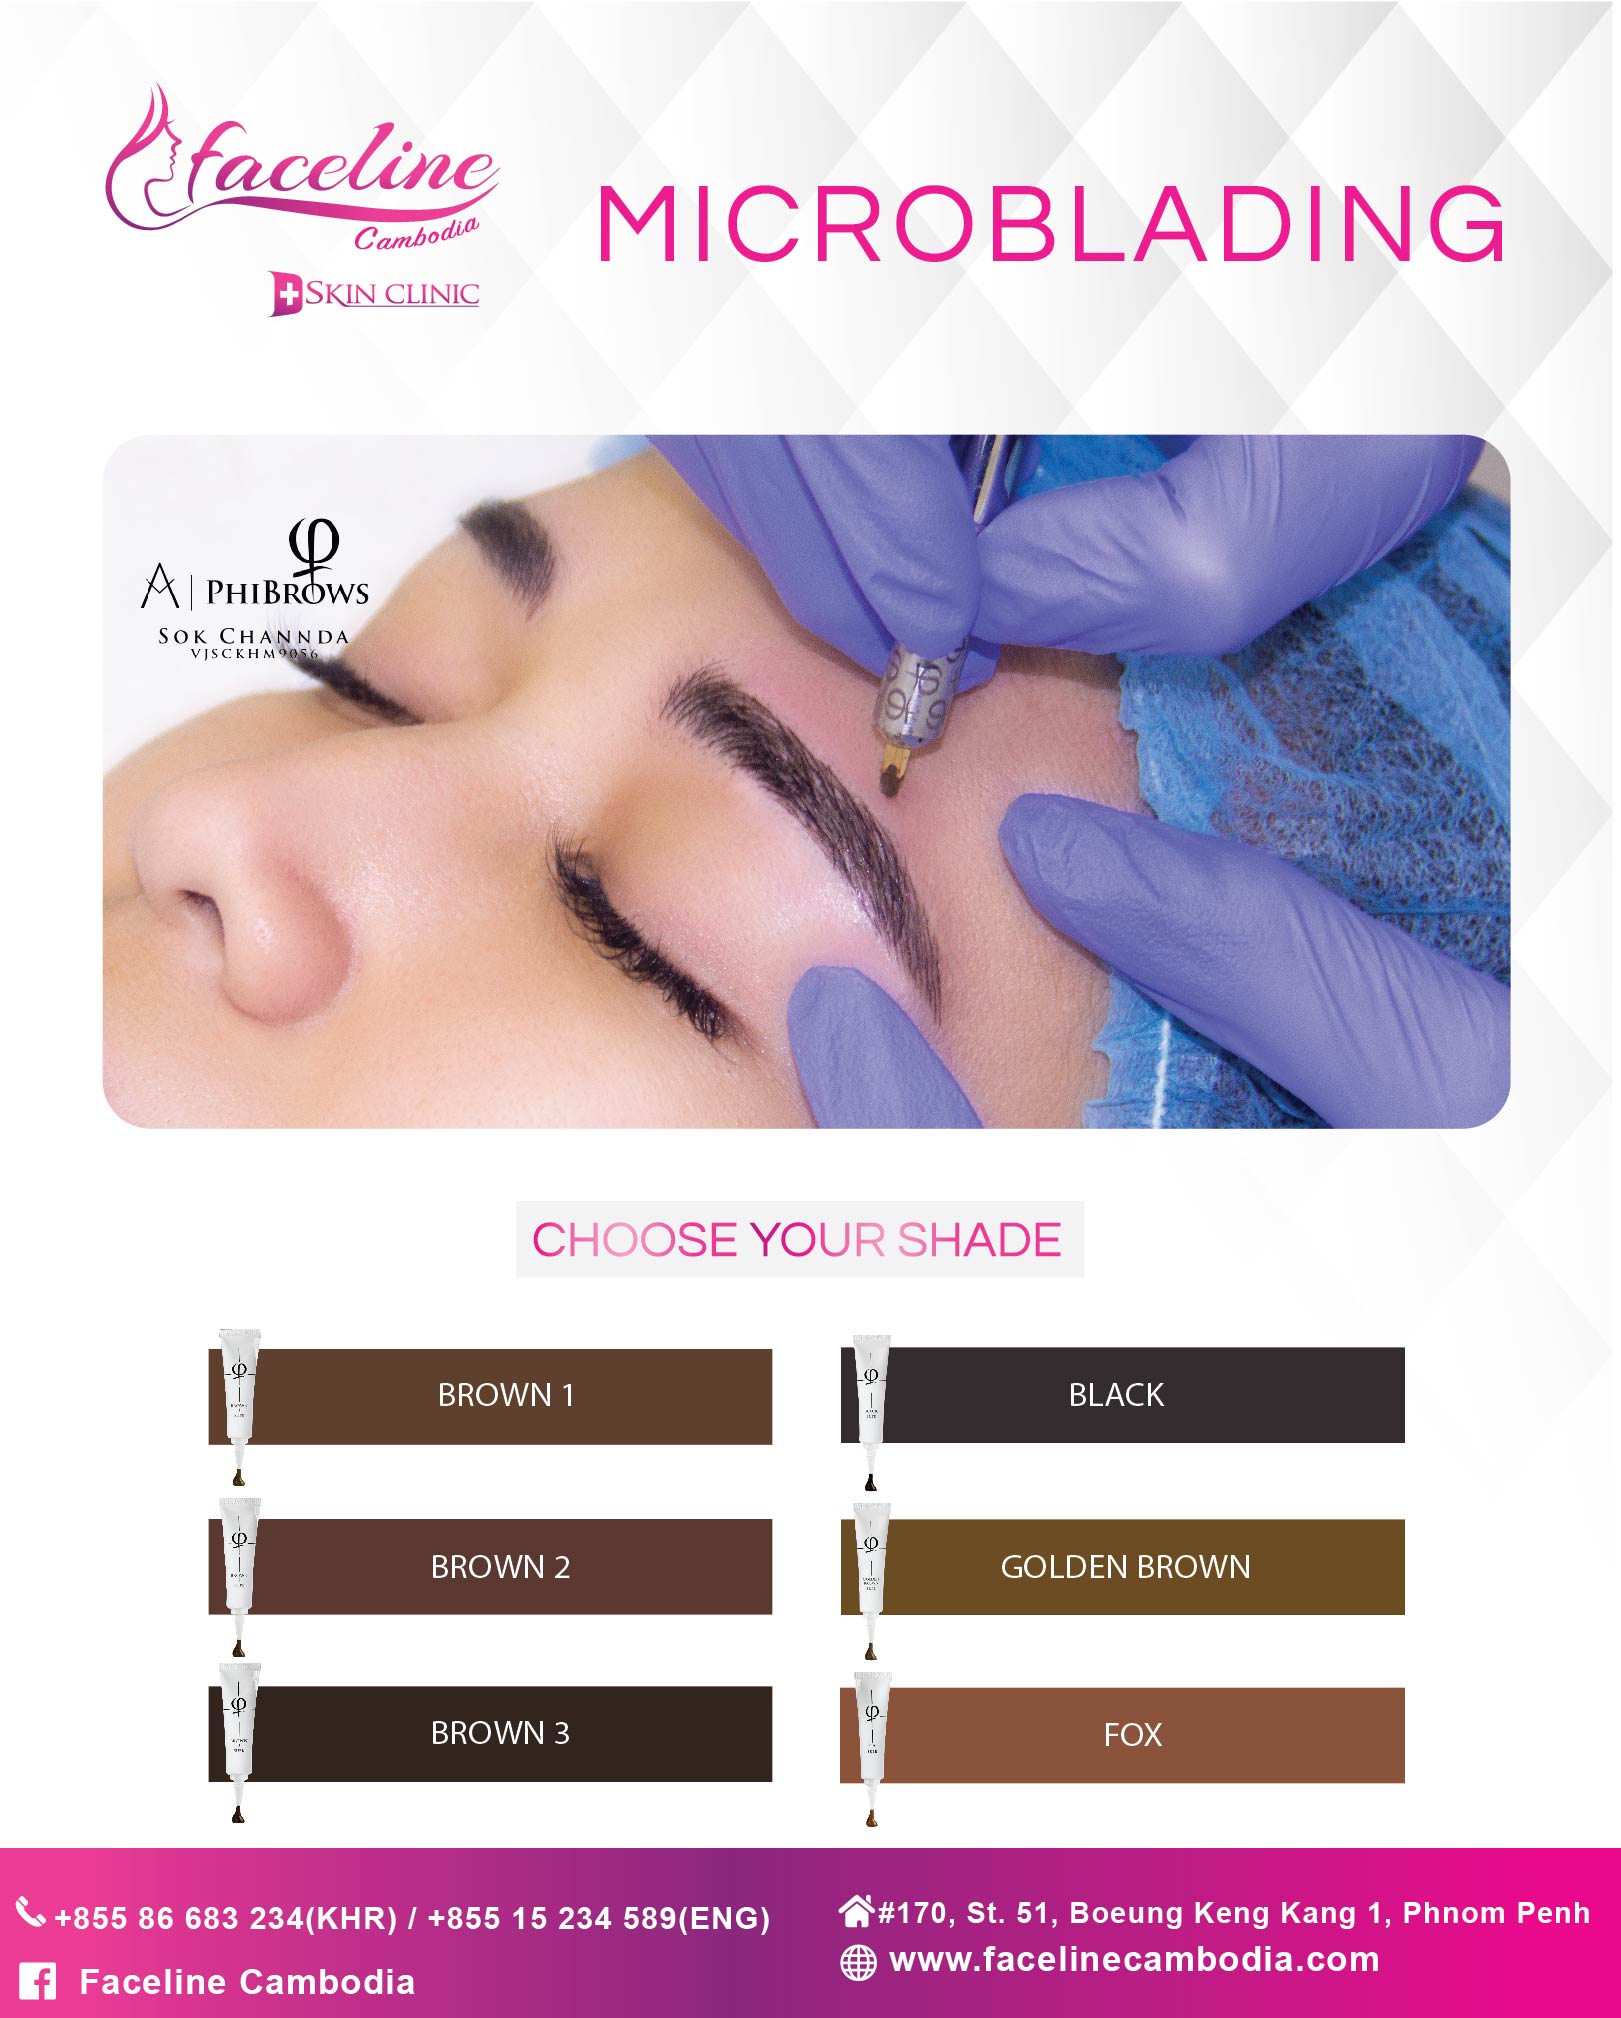 Things you need to know before your Microblading procedure 